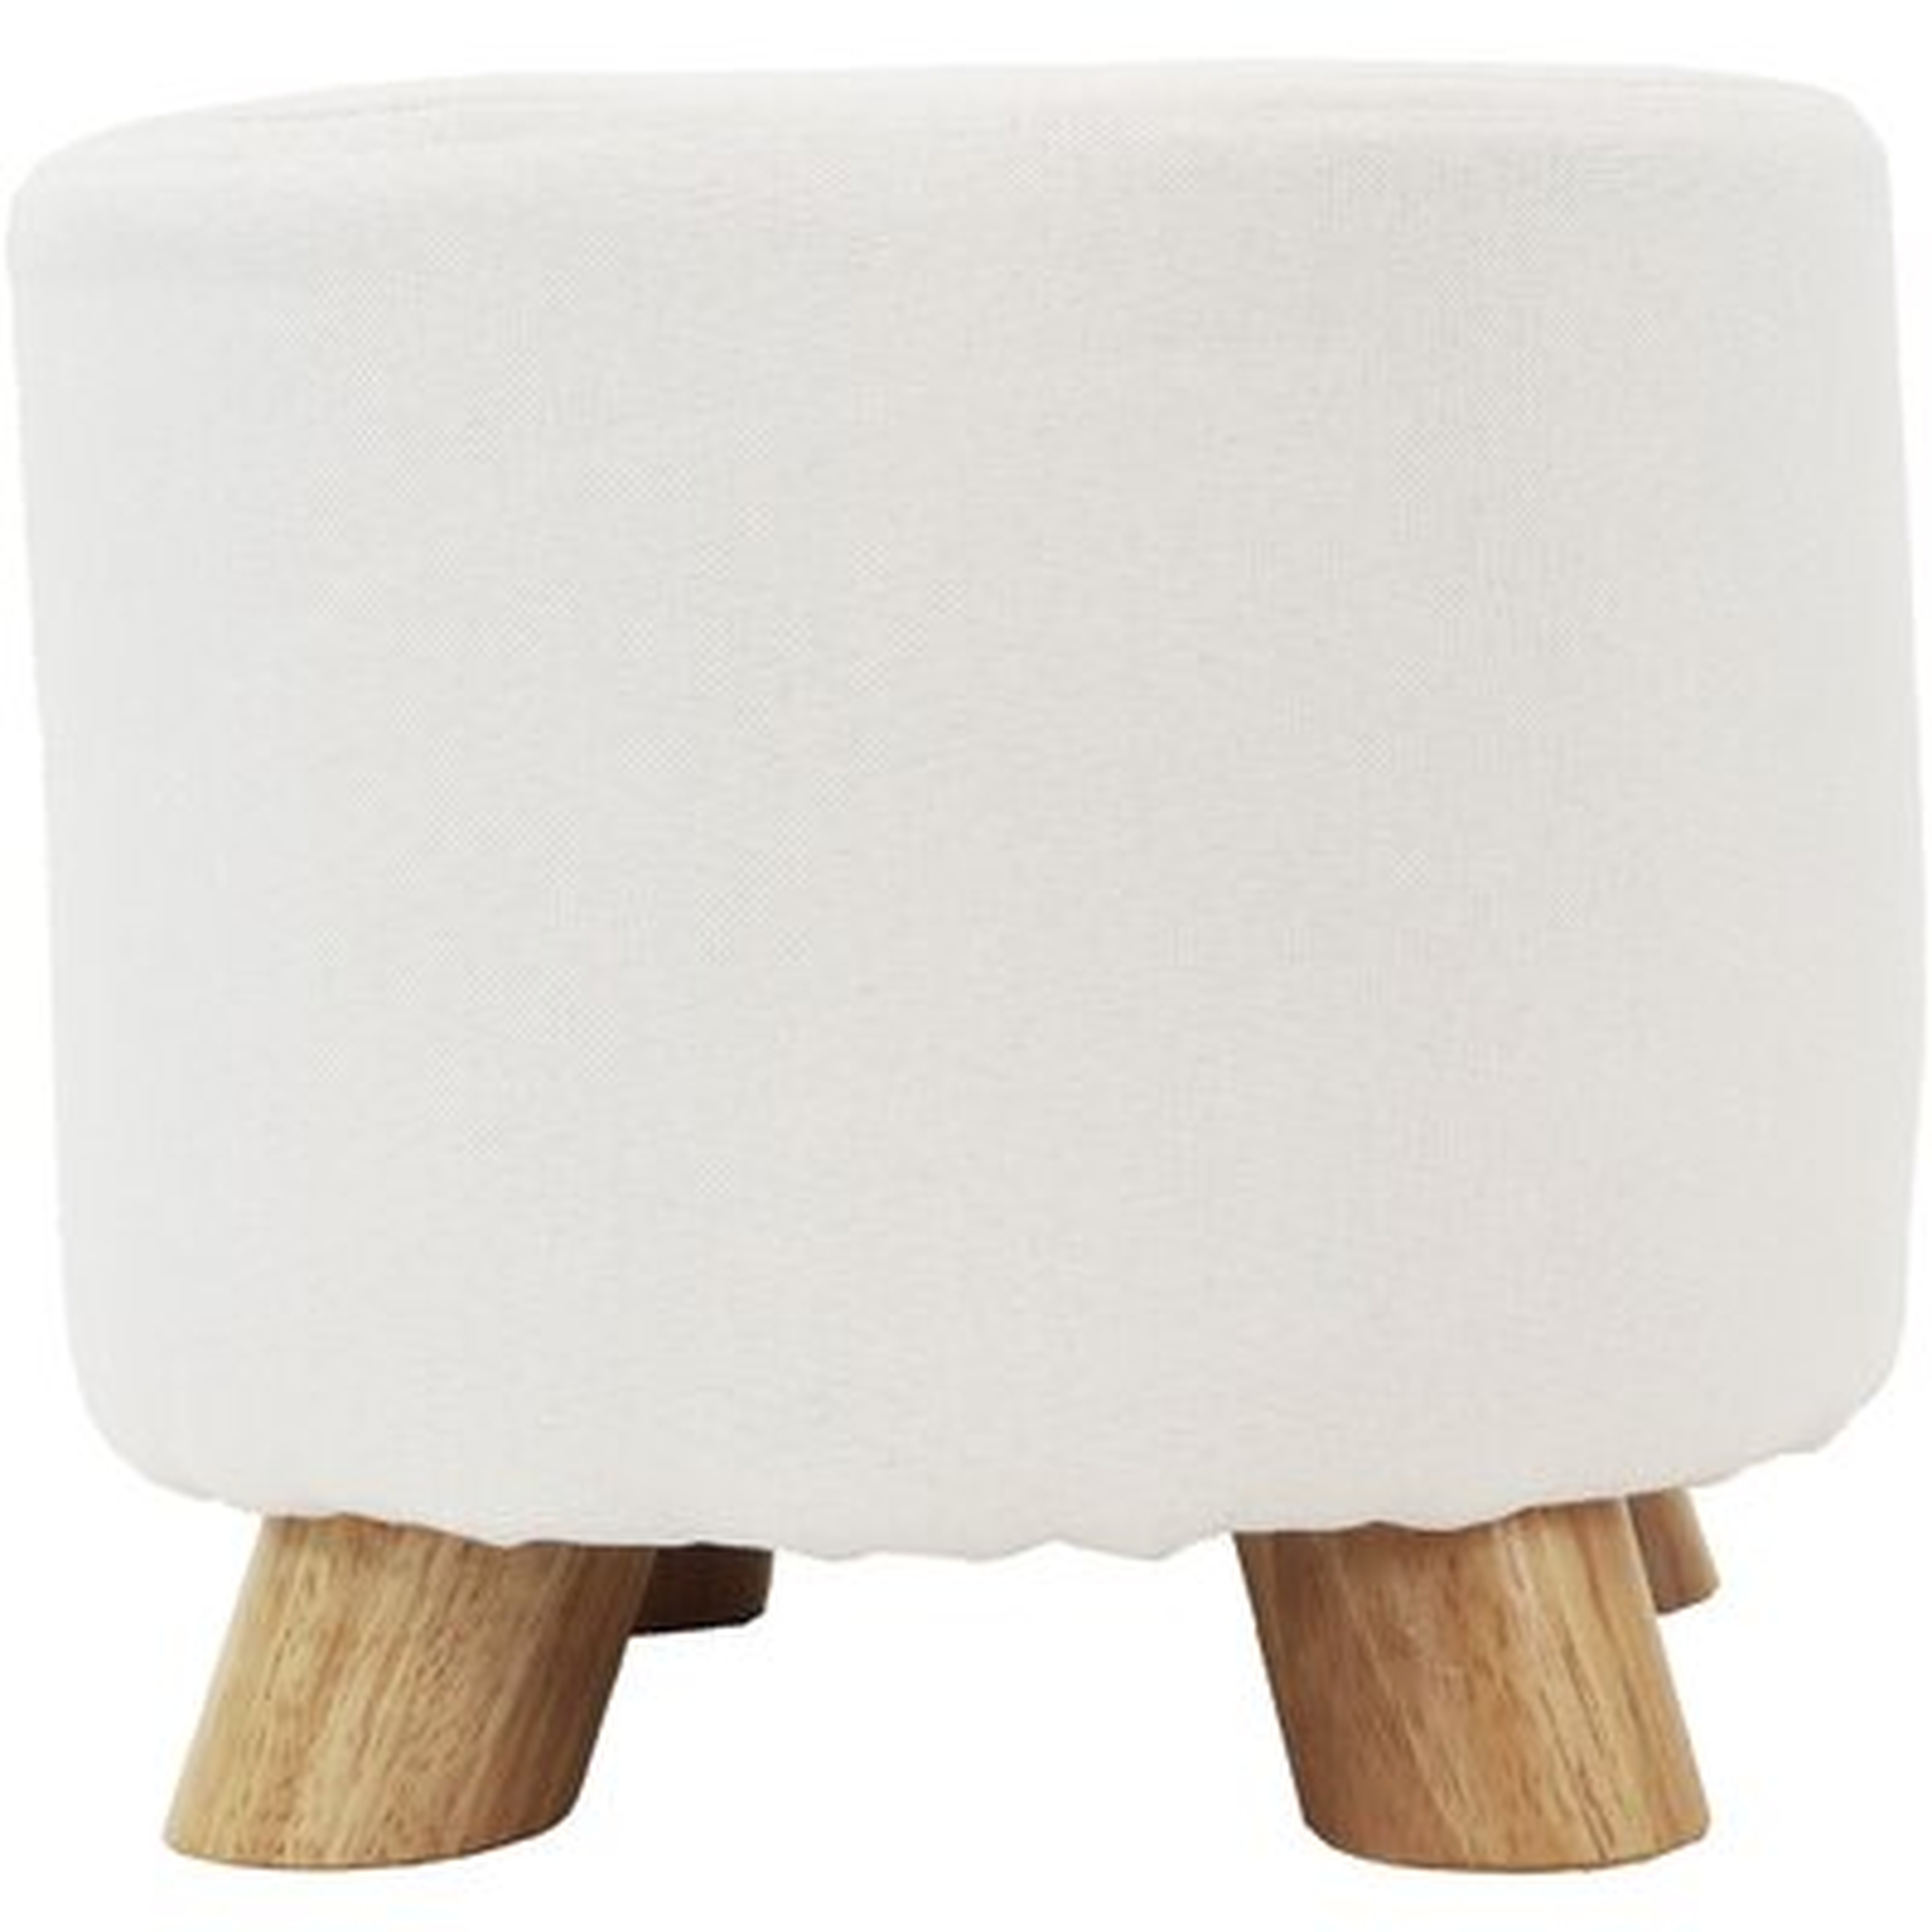 10-Inch White Upholstered Mini Foot Stool With Wooden Legs - Wayfair